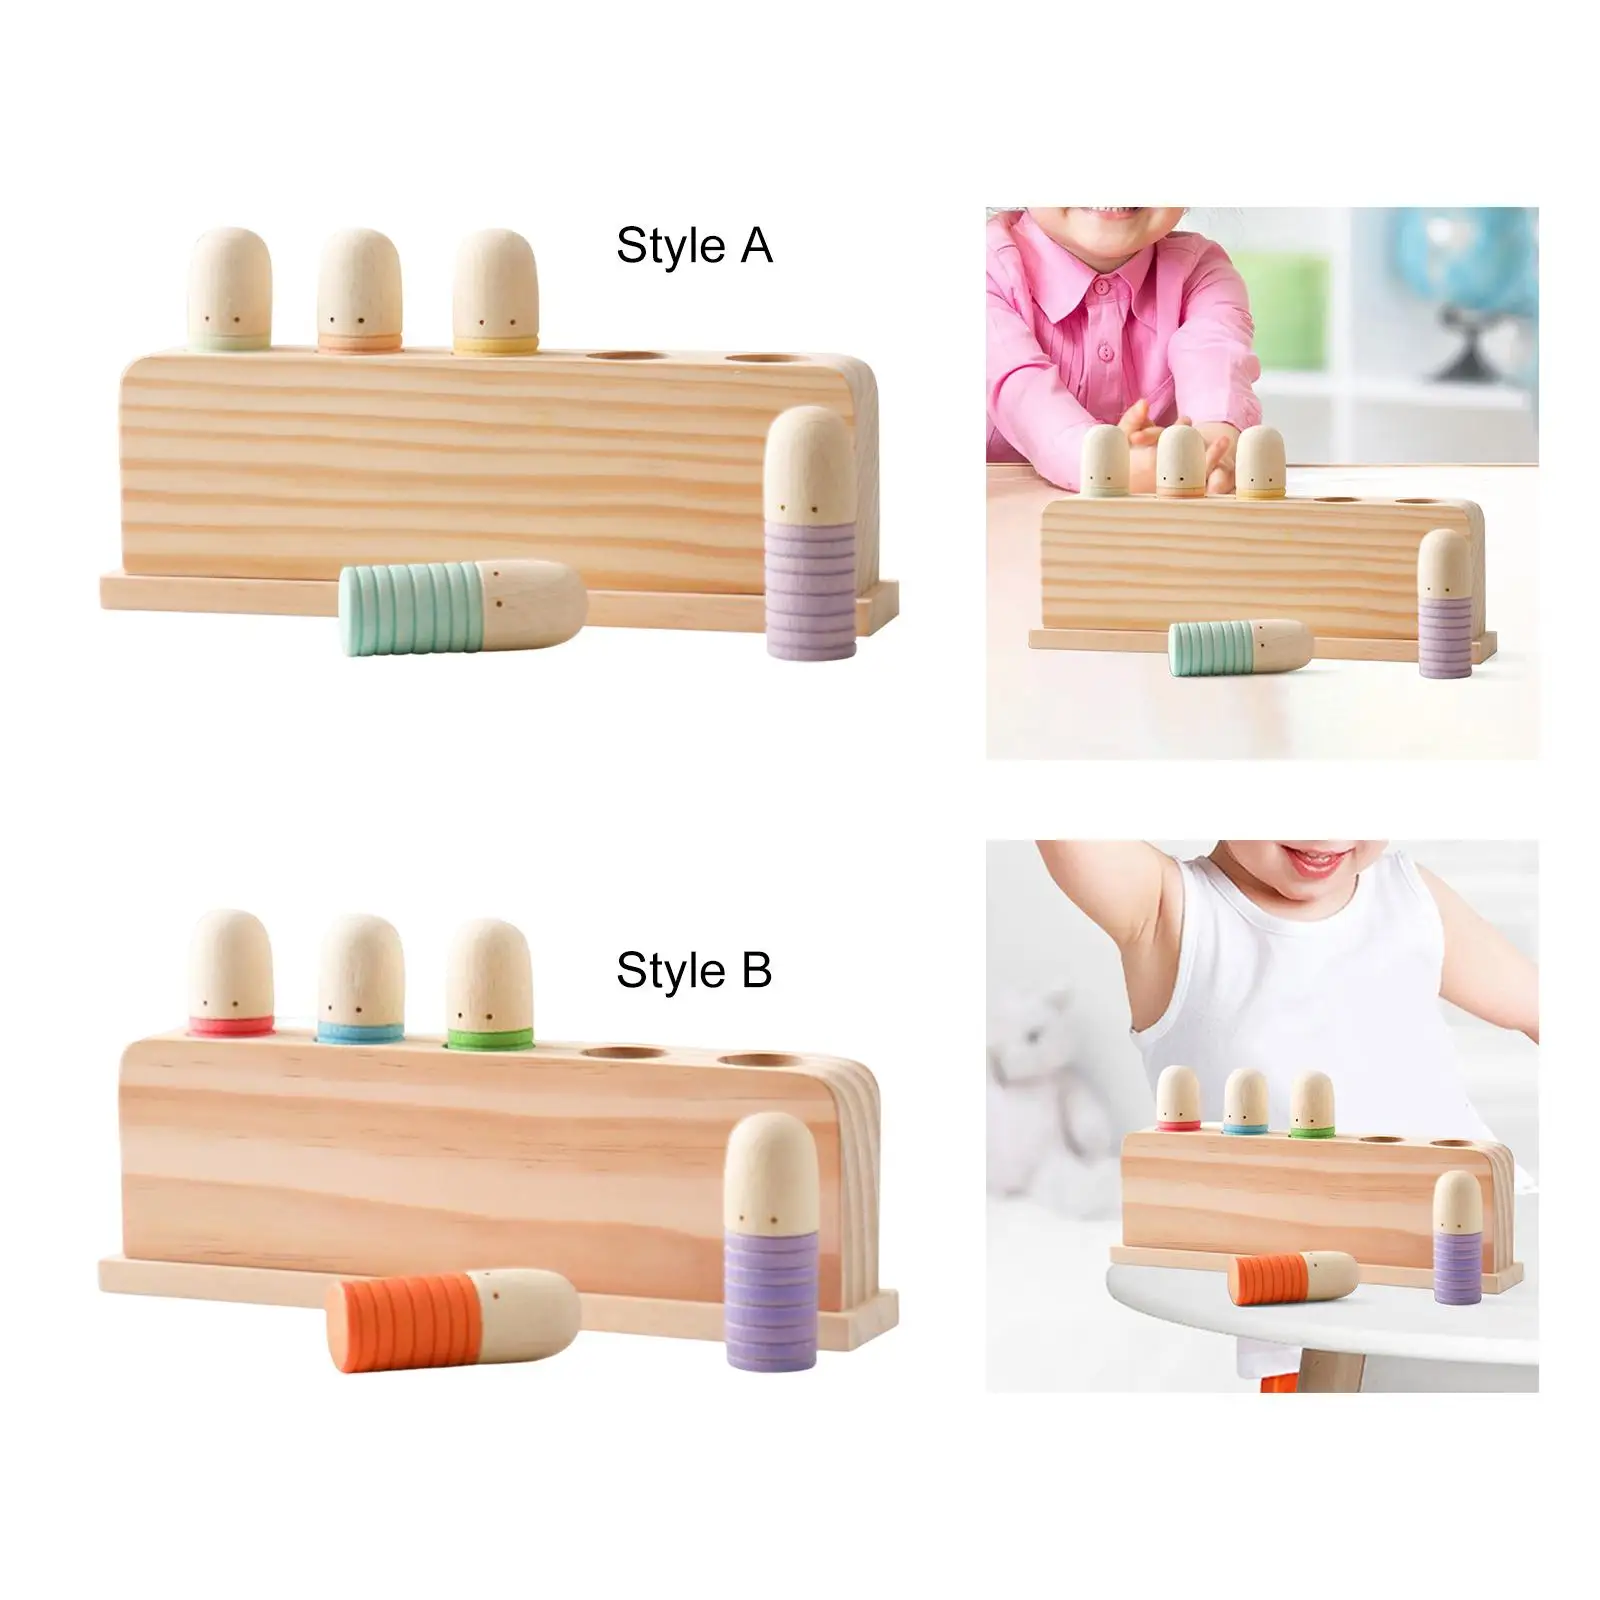 Wooden Rainbow Peg Dolls Shapes Sorting Toys Montessori Toys 5 Wood People Figures Cylinder Blocks for Toddler Birthday Gifts